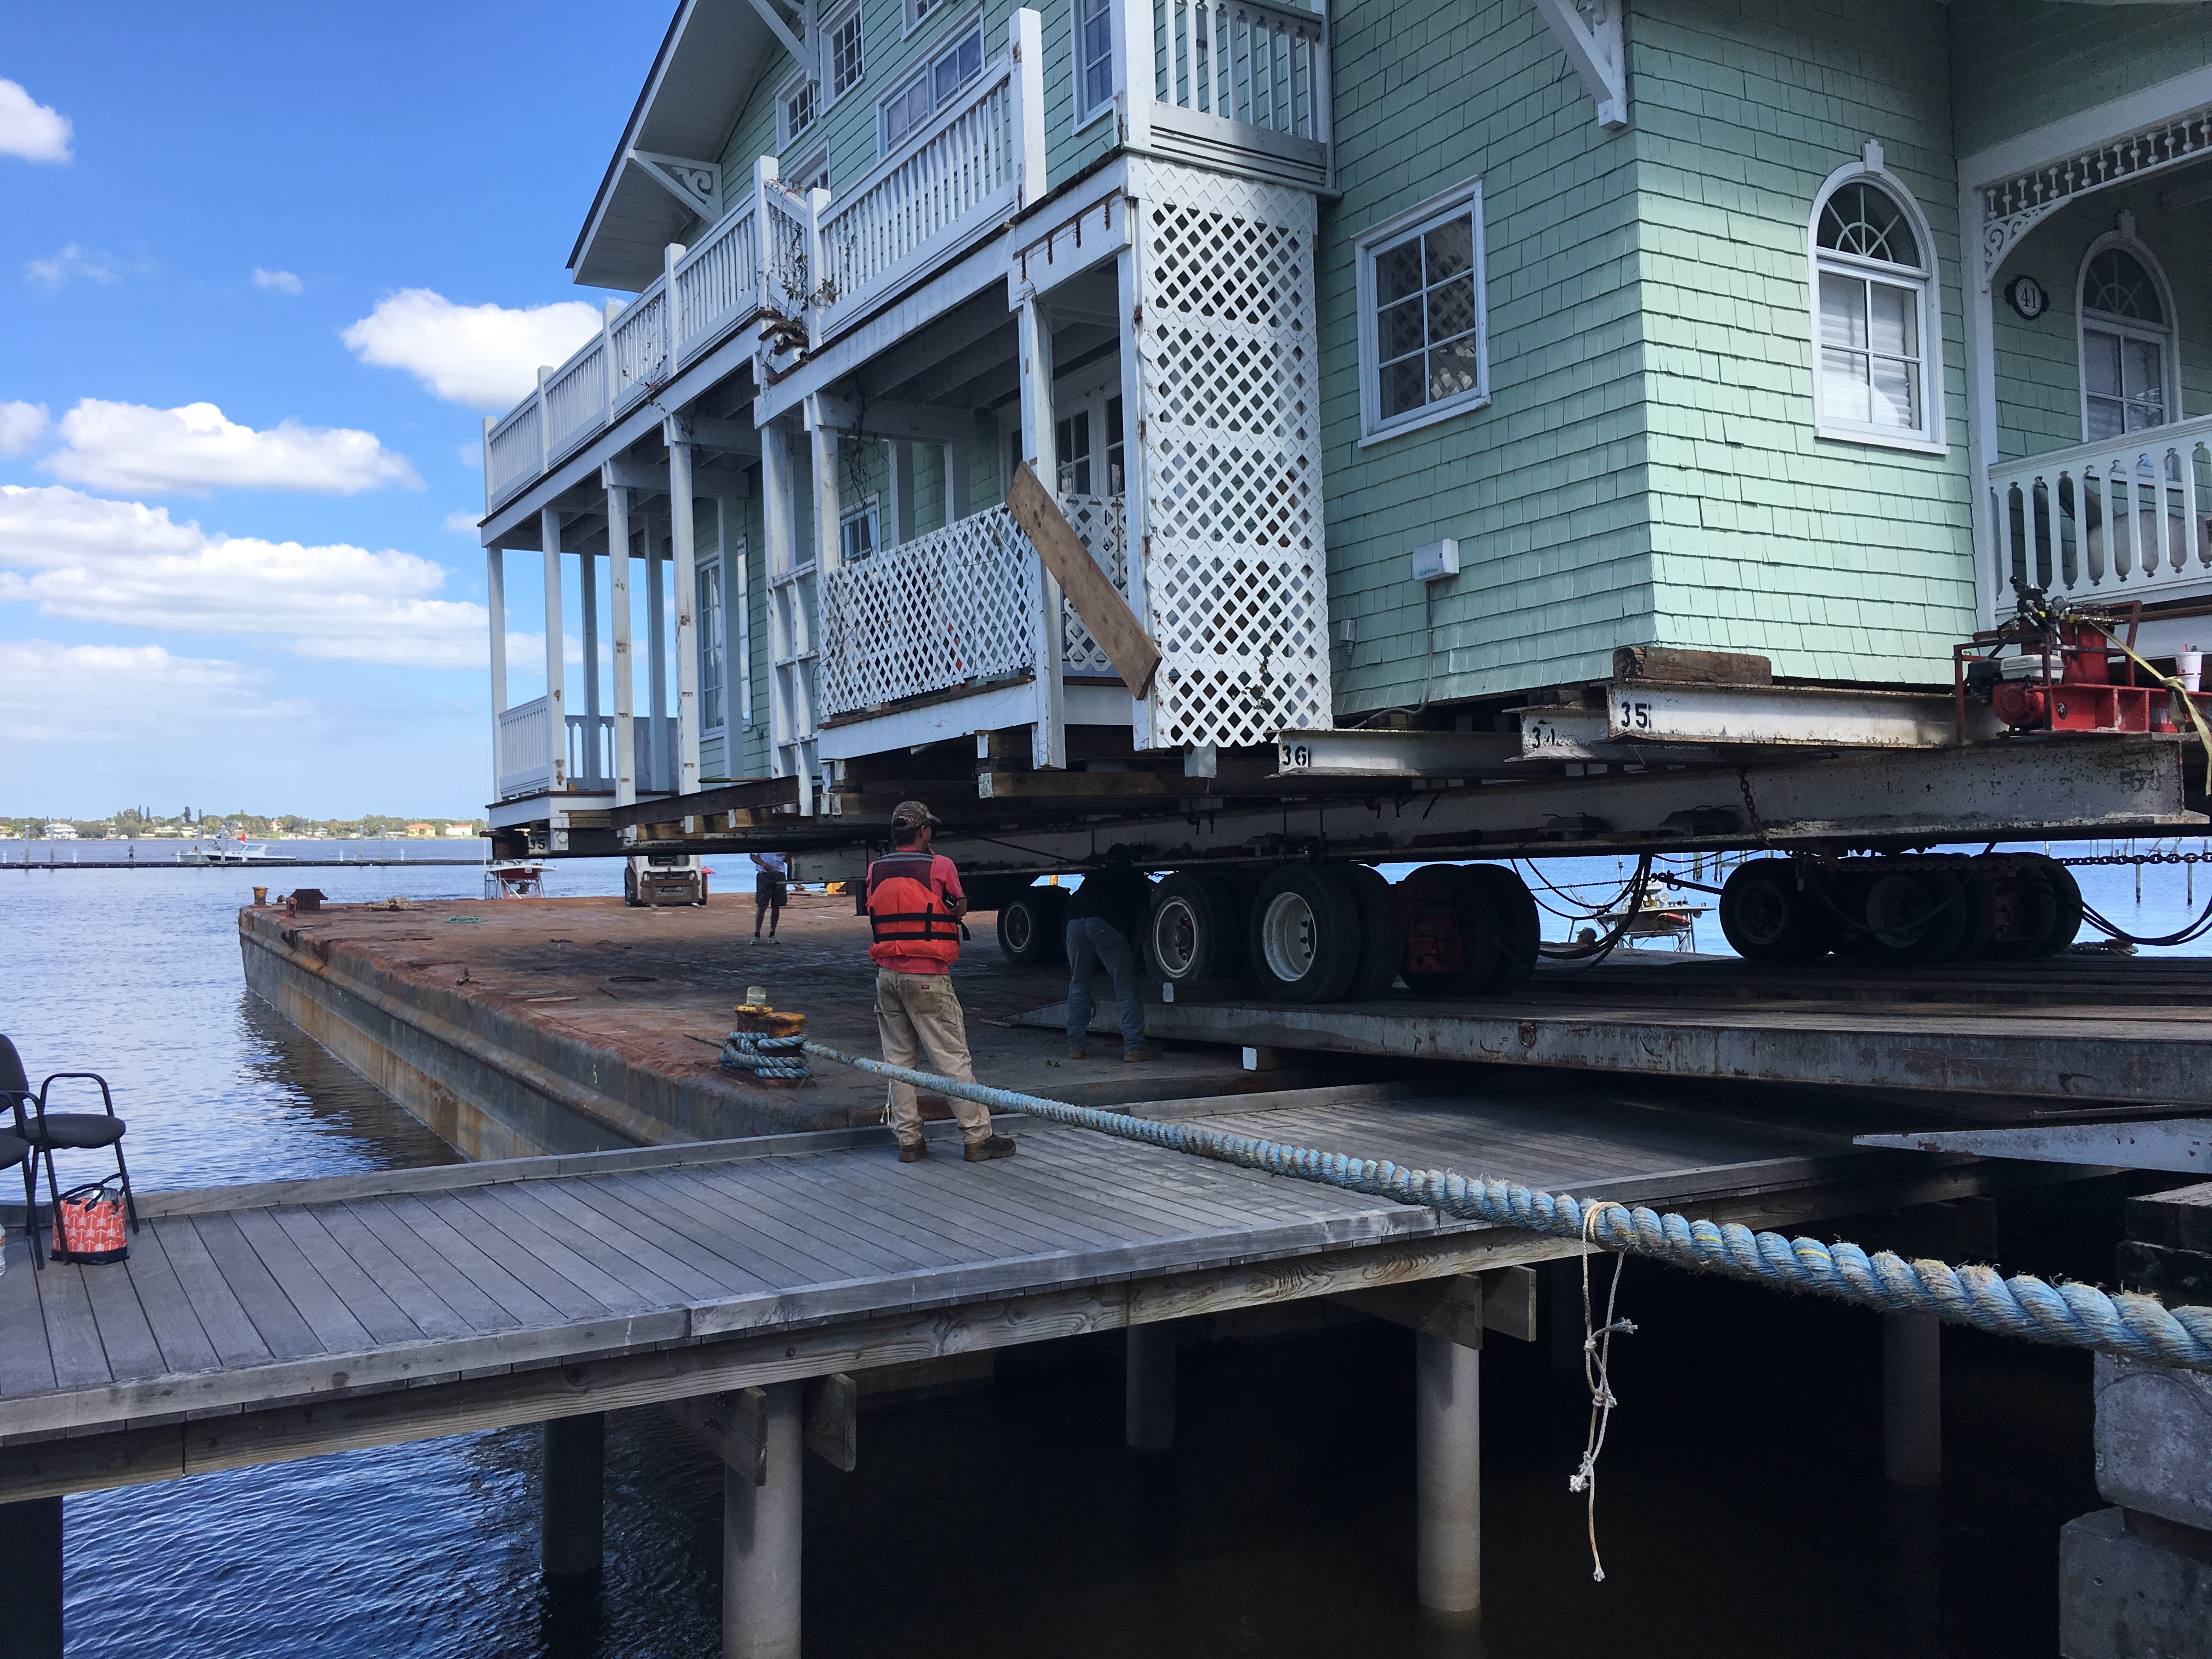 The historic Clifton Fishing Lodge was carefully loaded onto a barge and moved nearby to make room for Seminole Bluff